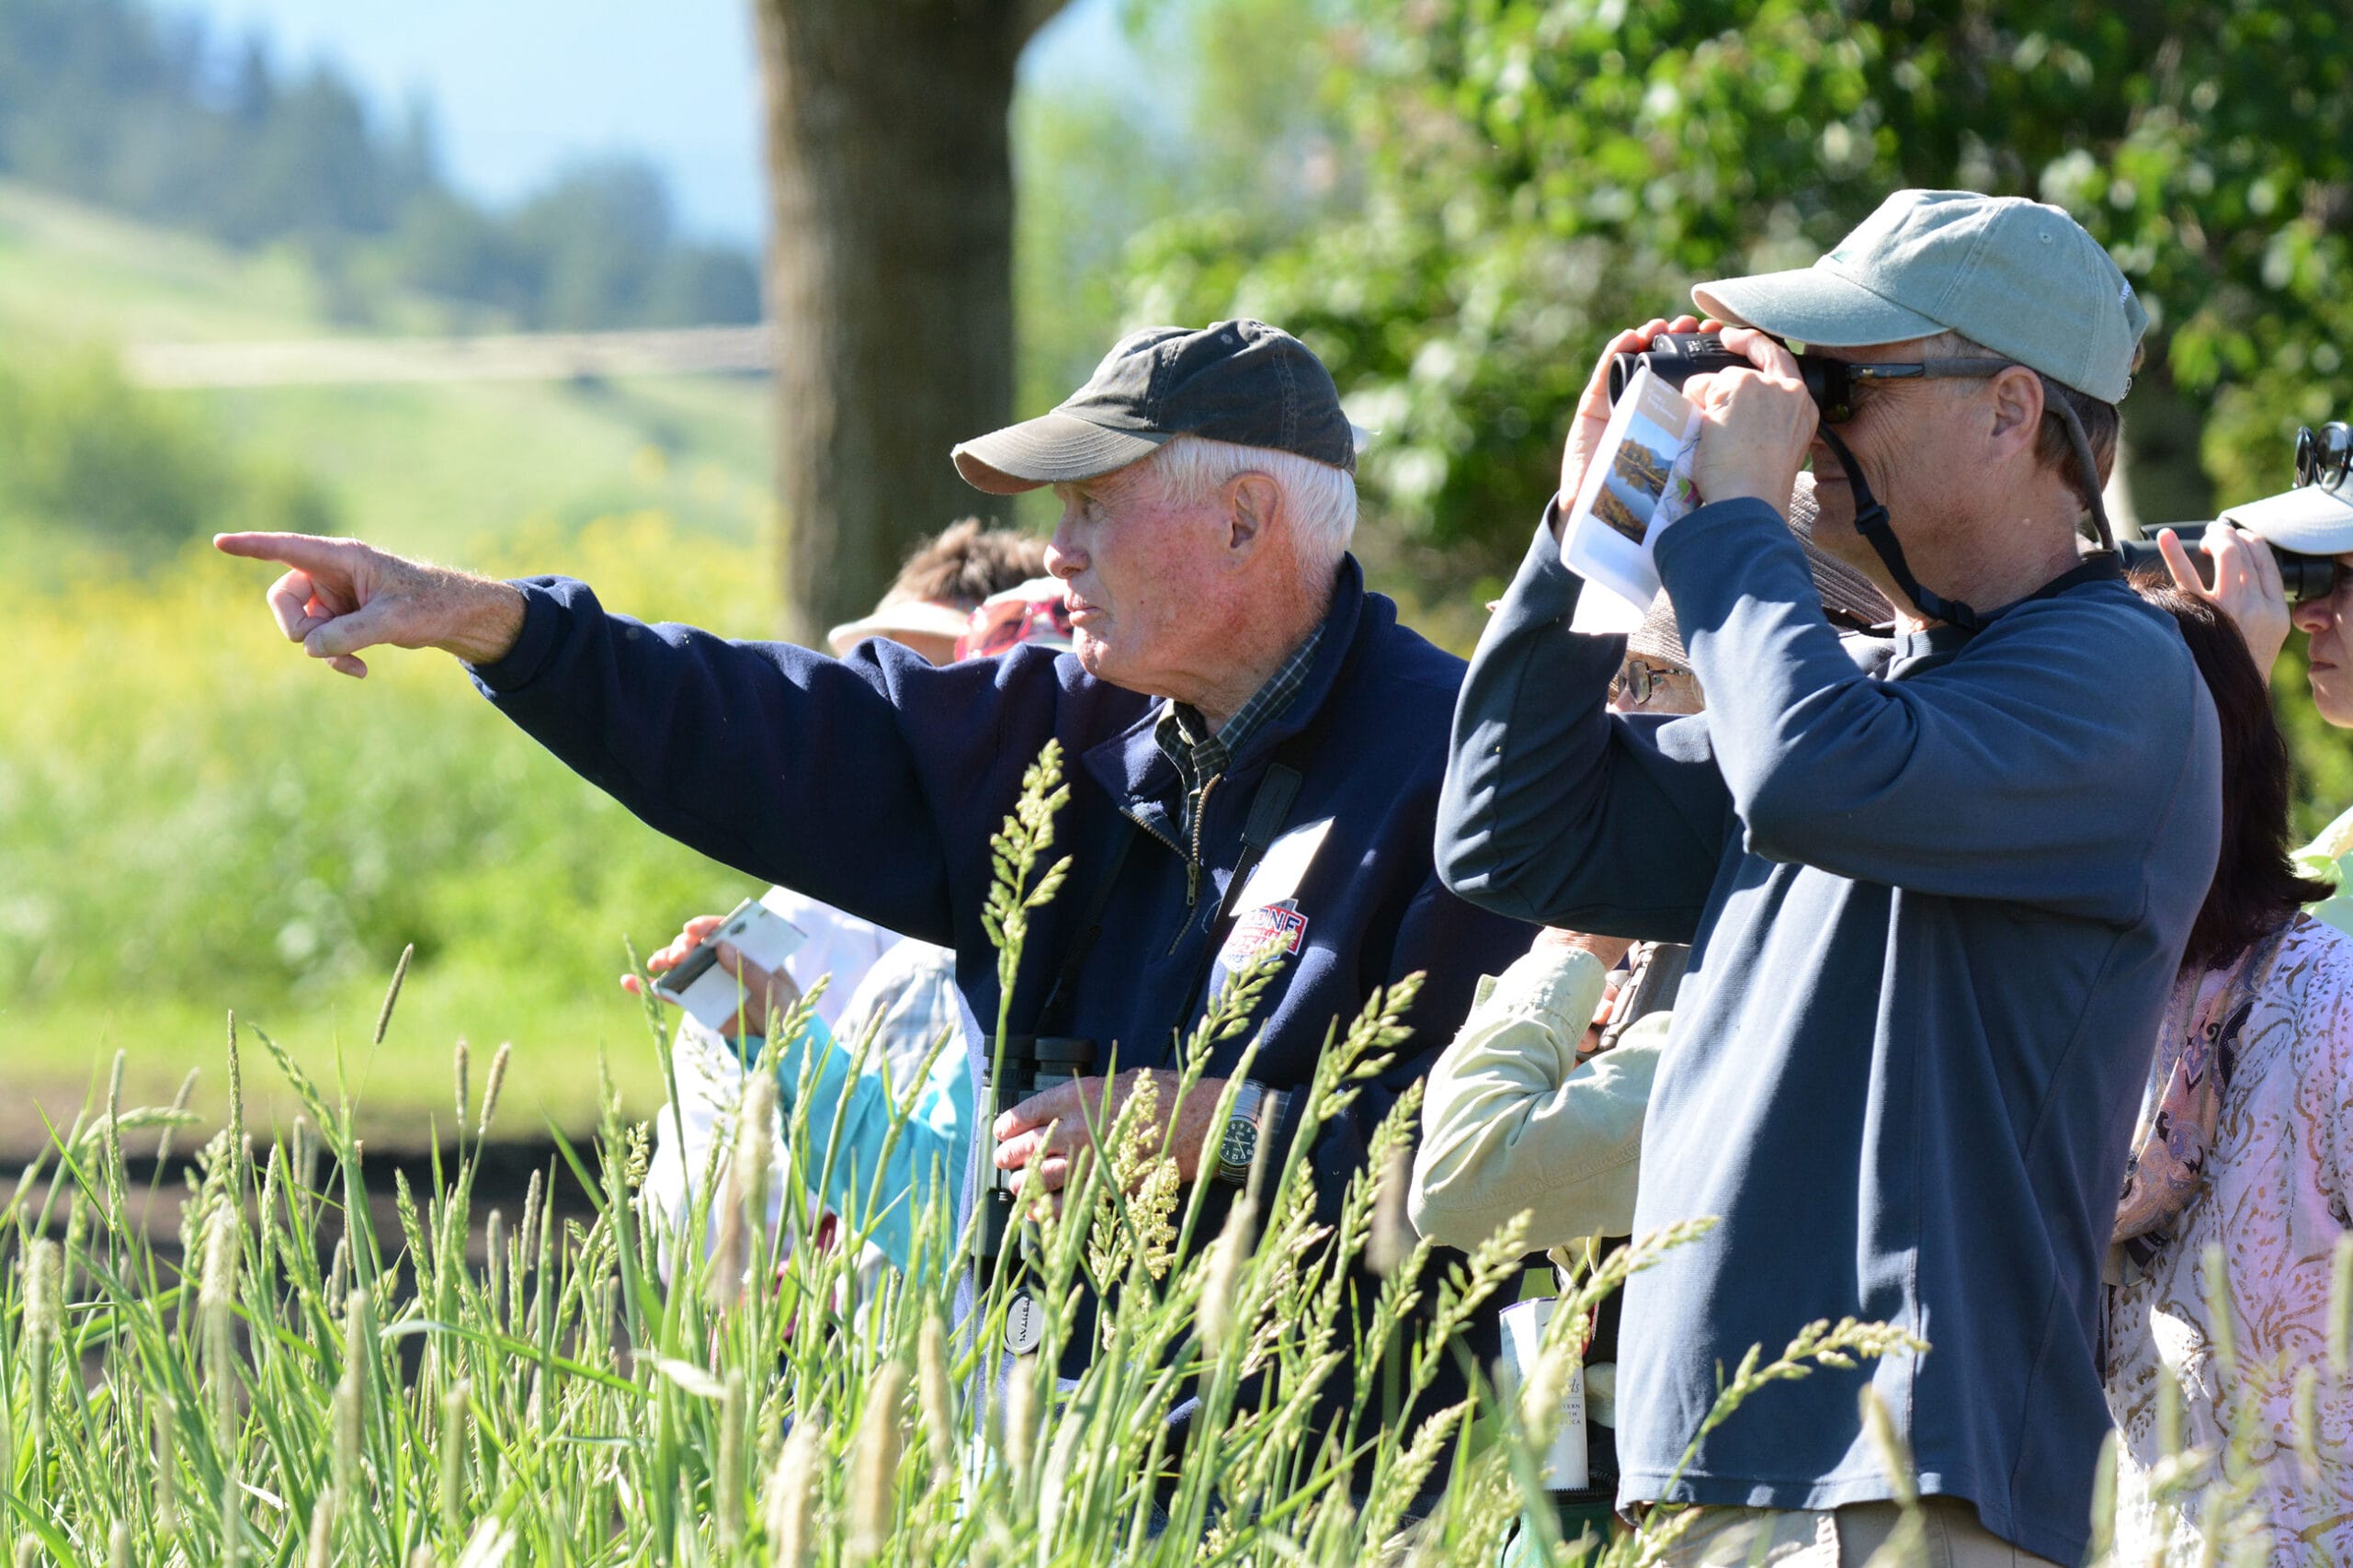 A group of people looking through binoculars at tall grasses.